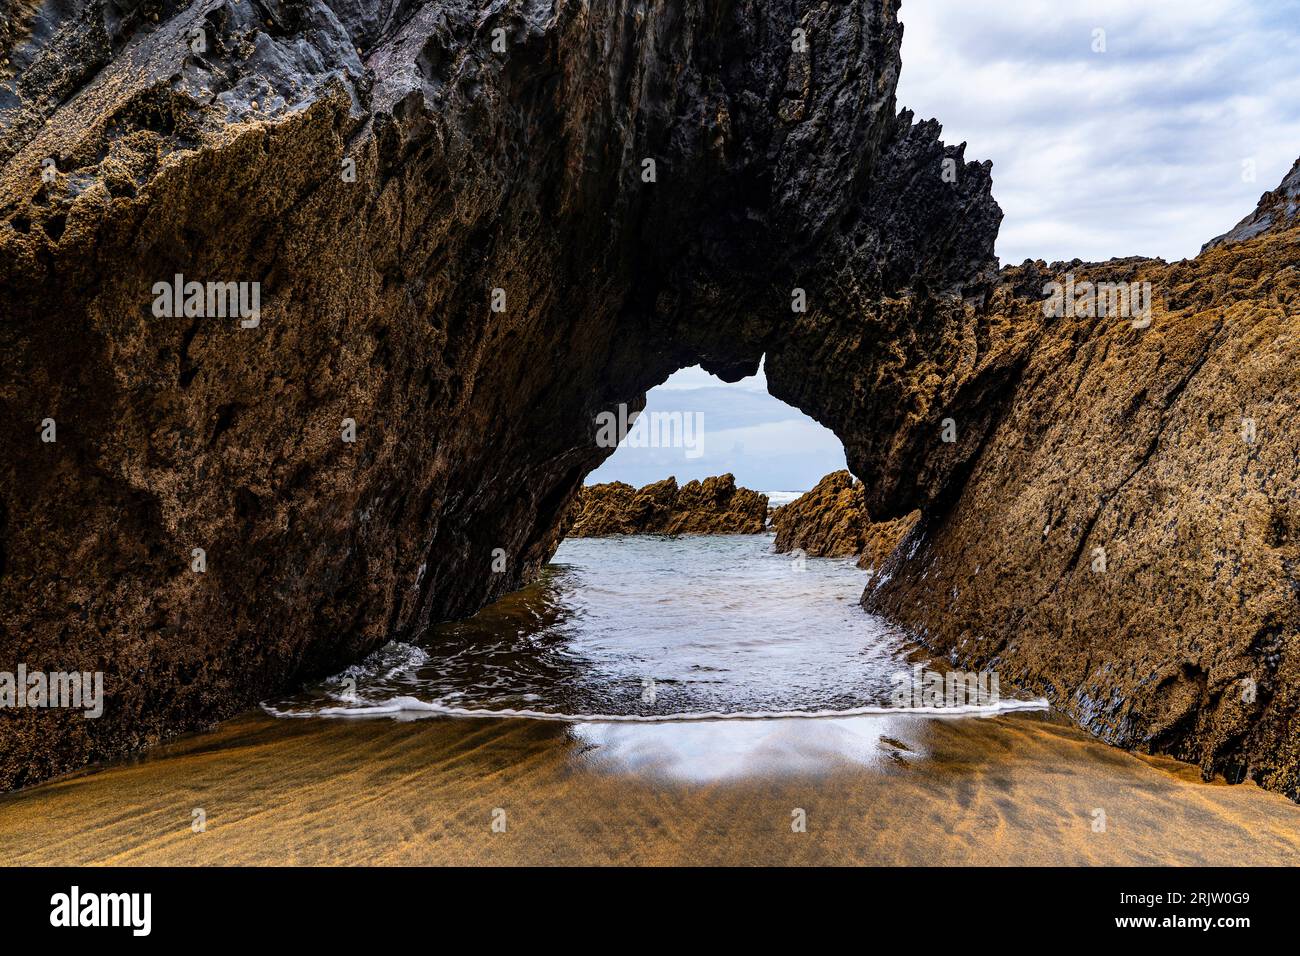 Natural archway, Playa de Otur, Asturias - Otur beach part of the Protected Landscape of the Western Coast of Asturias, Spain. Stock Photo